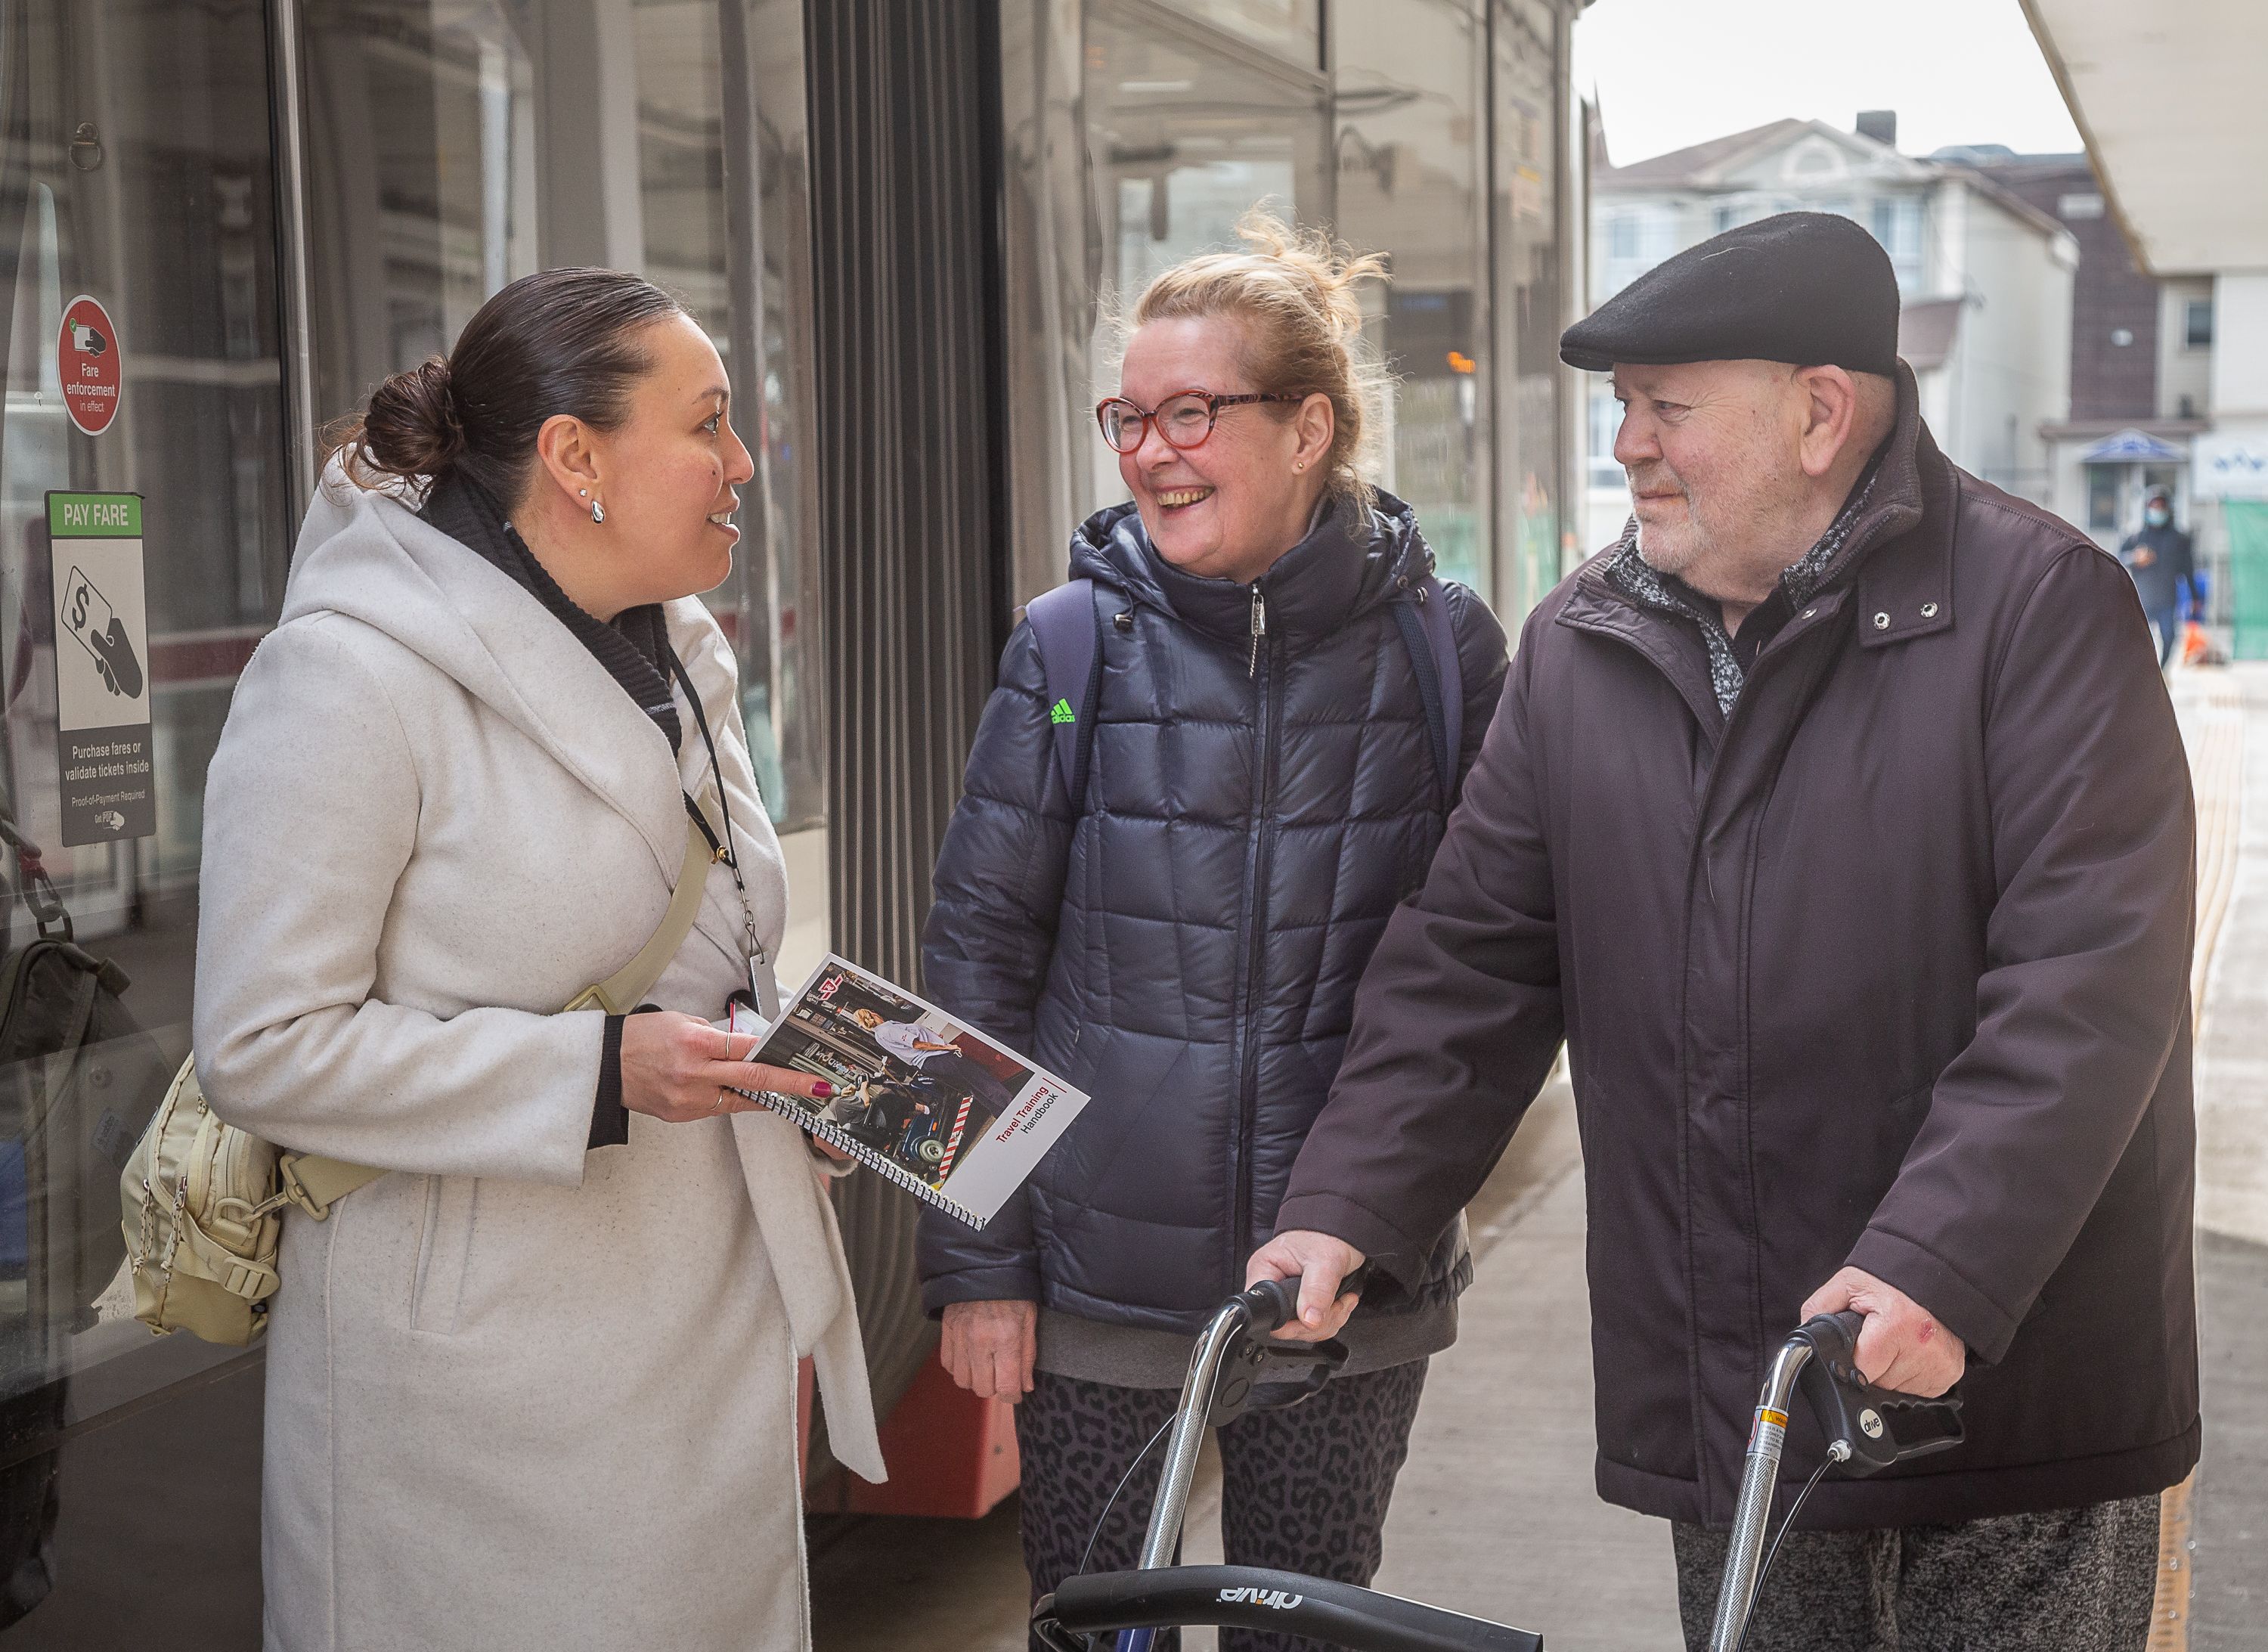 A TTC Travel Trainer is speaking to two Wheel-Trans customers at a streetcar stop during a Travel Training session.